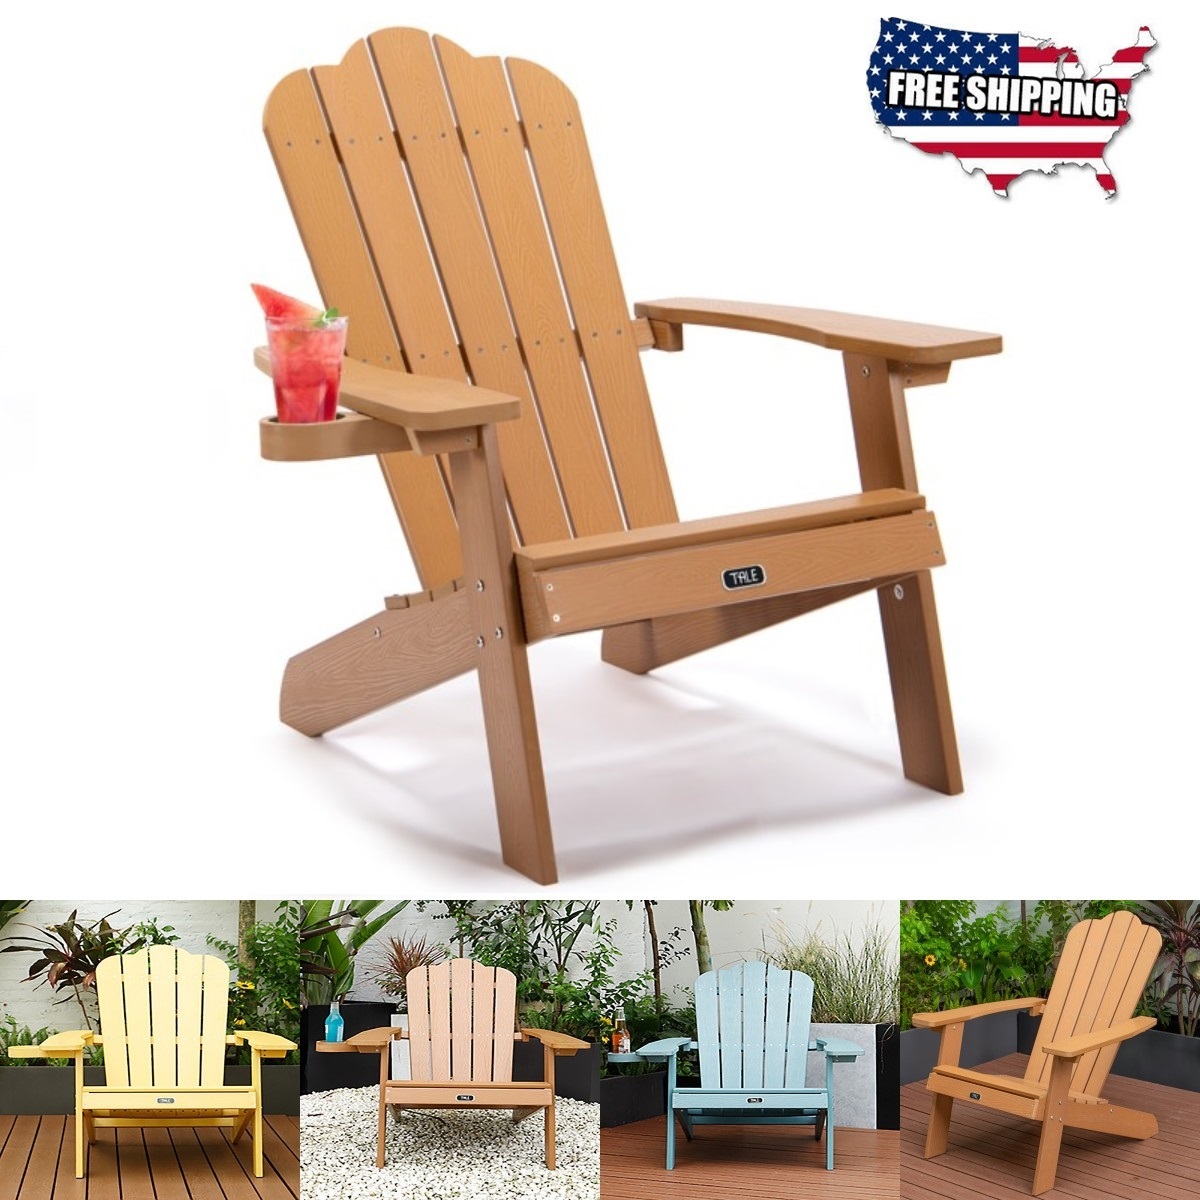 [Quick Delivery] Adirondack Chair, Outdoor Weather Resistant 380 lbs Capacity Load Plastic Patio Chairs for Pool Patio Deck Garden, Backyard Polystyrene Adirondack Chair,Brown - image 1 of 14